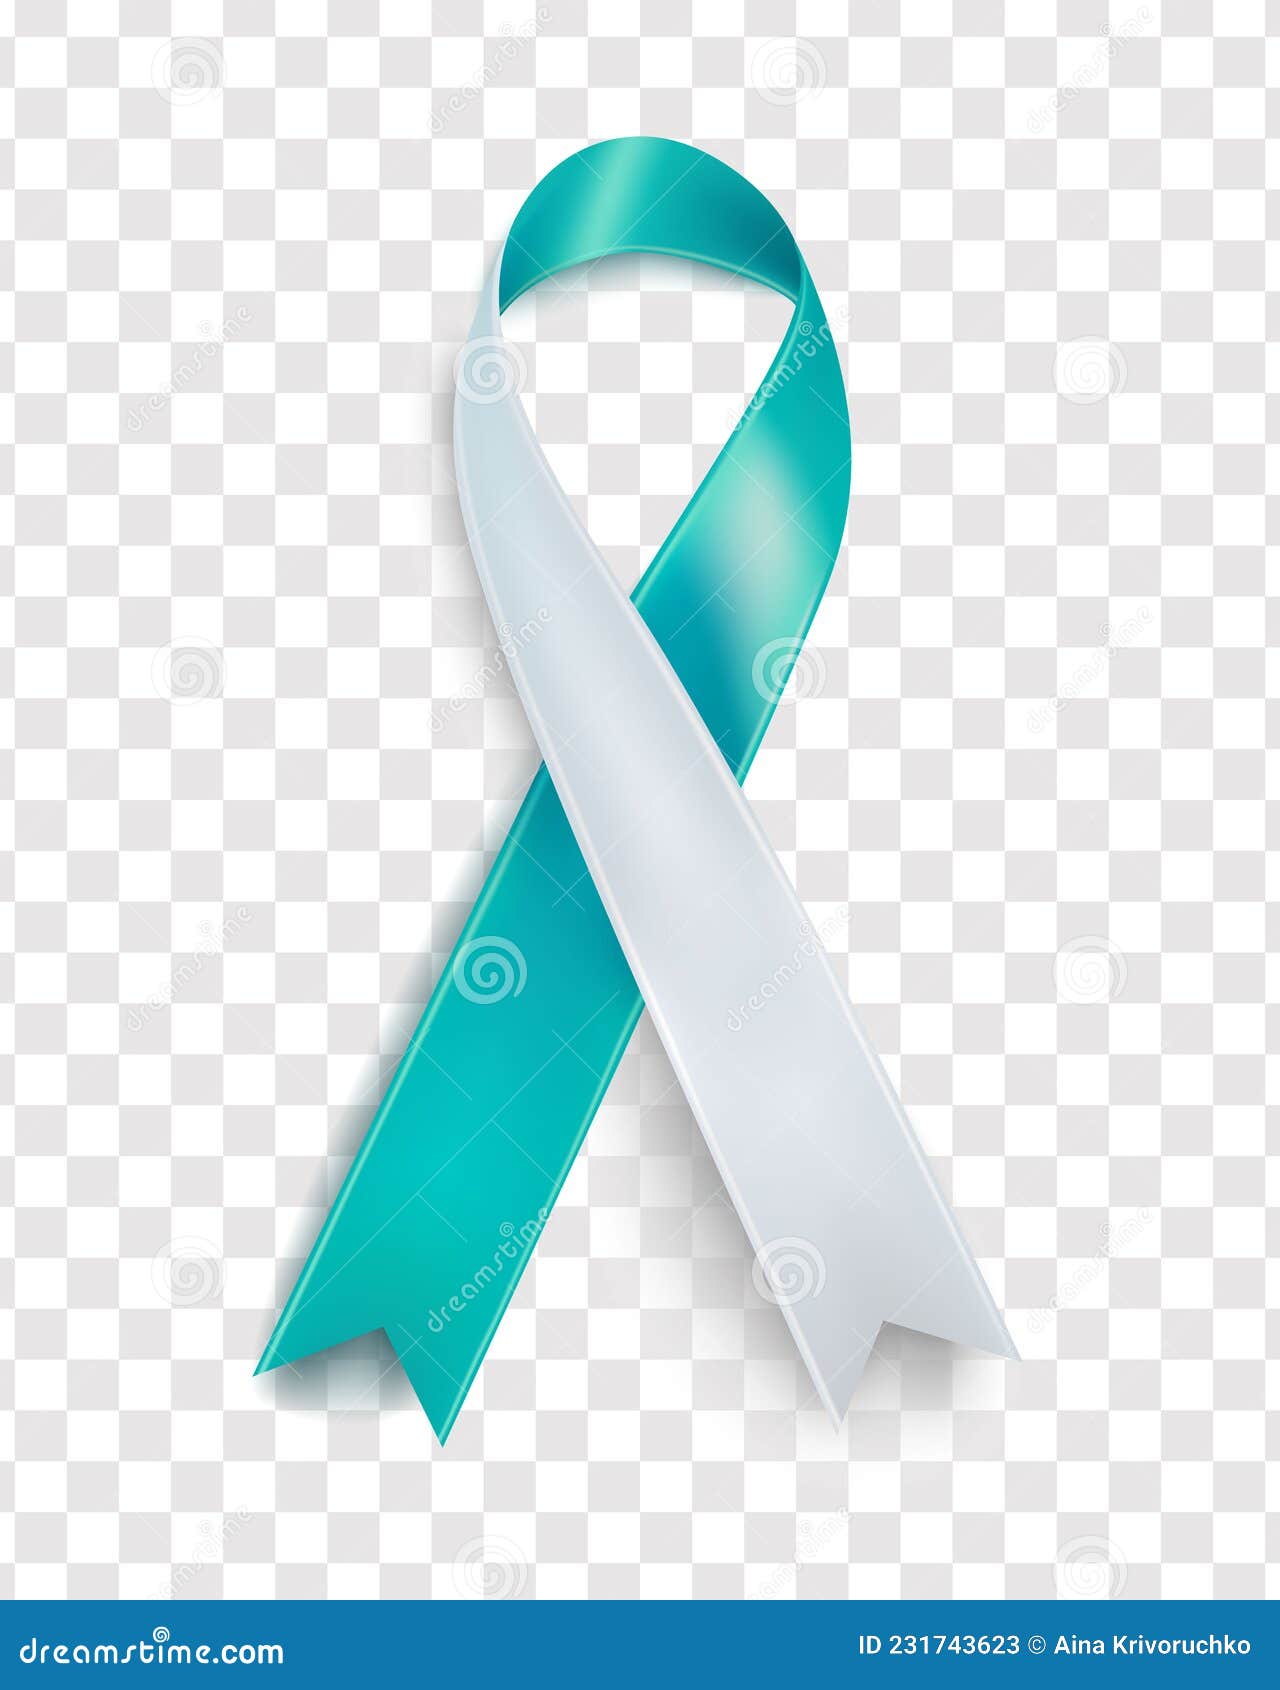 Vector of the Cervical Cancer Awareness Tape. Realistic White and Turquoise  Ribbon on a Transparent Background Stock Vector - Illustration of hope,  isolated: 231743623